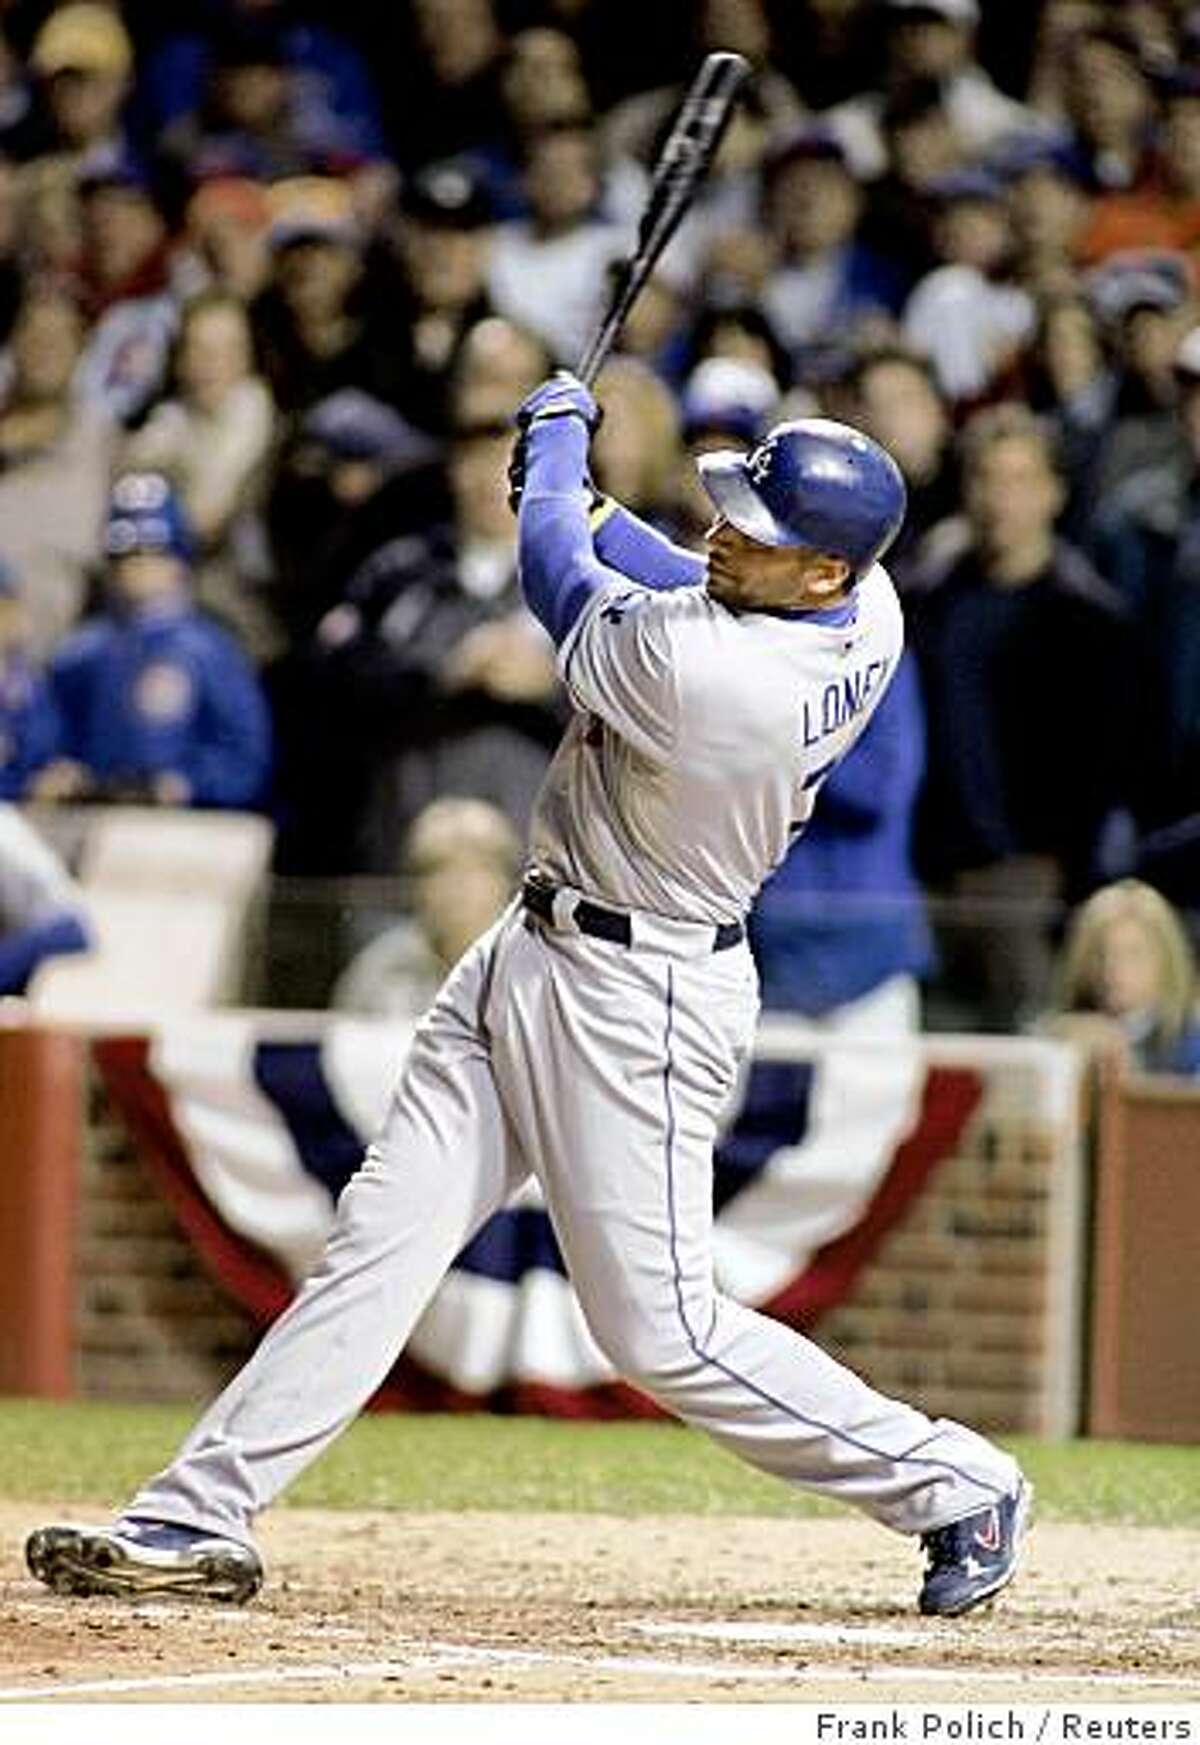 James Loney of the Los Angeles Dodgers watches his grand slam home run in the fifth inning against the Chicago Cubs during Game 1 of their MLB National League Divisional Series playoff baseball game in Chicago, October 1, 2008. REUTERS/Frank Polich (UNITED STATES)